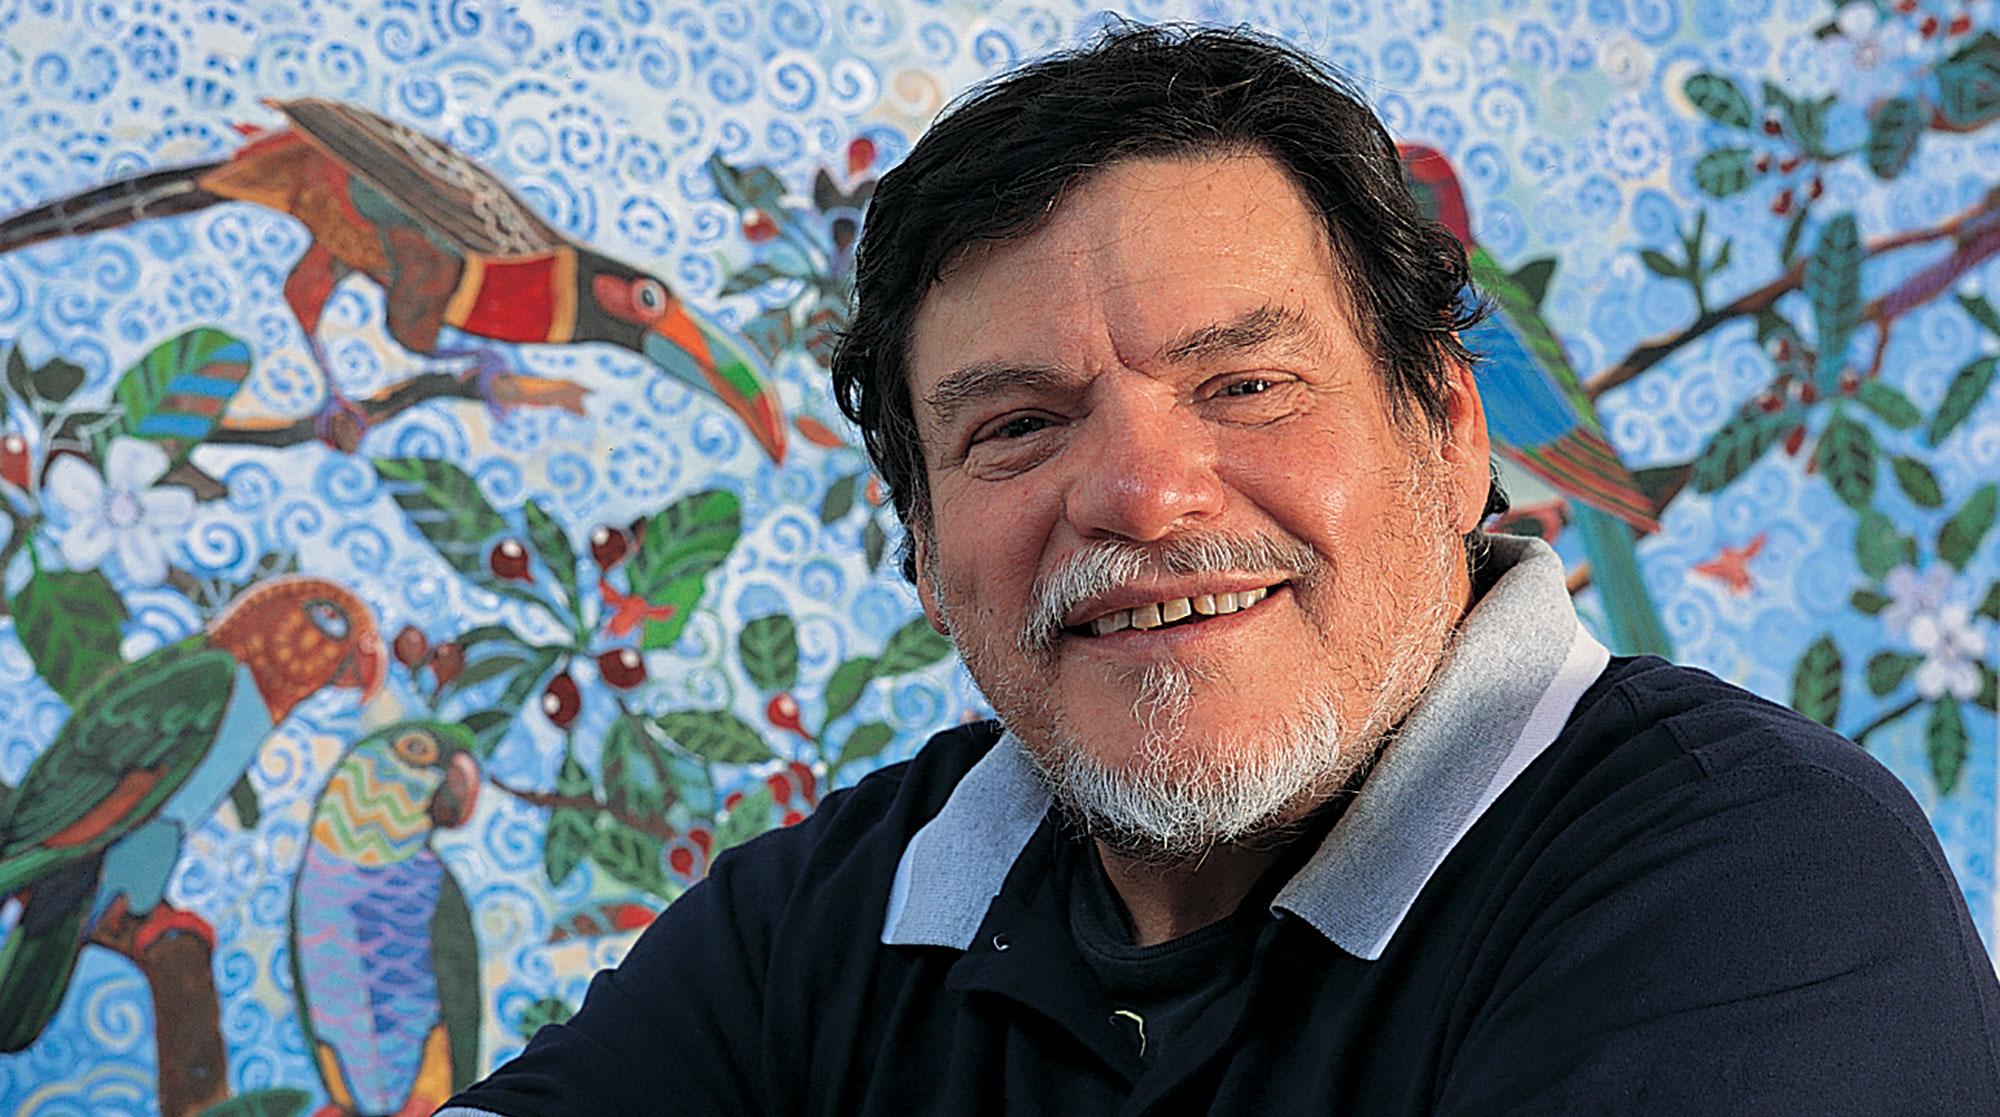 A friendly looking person with a gray beard smiles in front of art depicting parrots